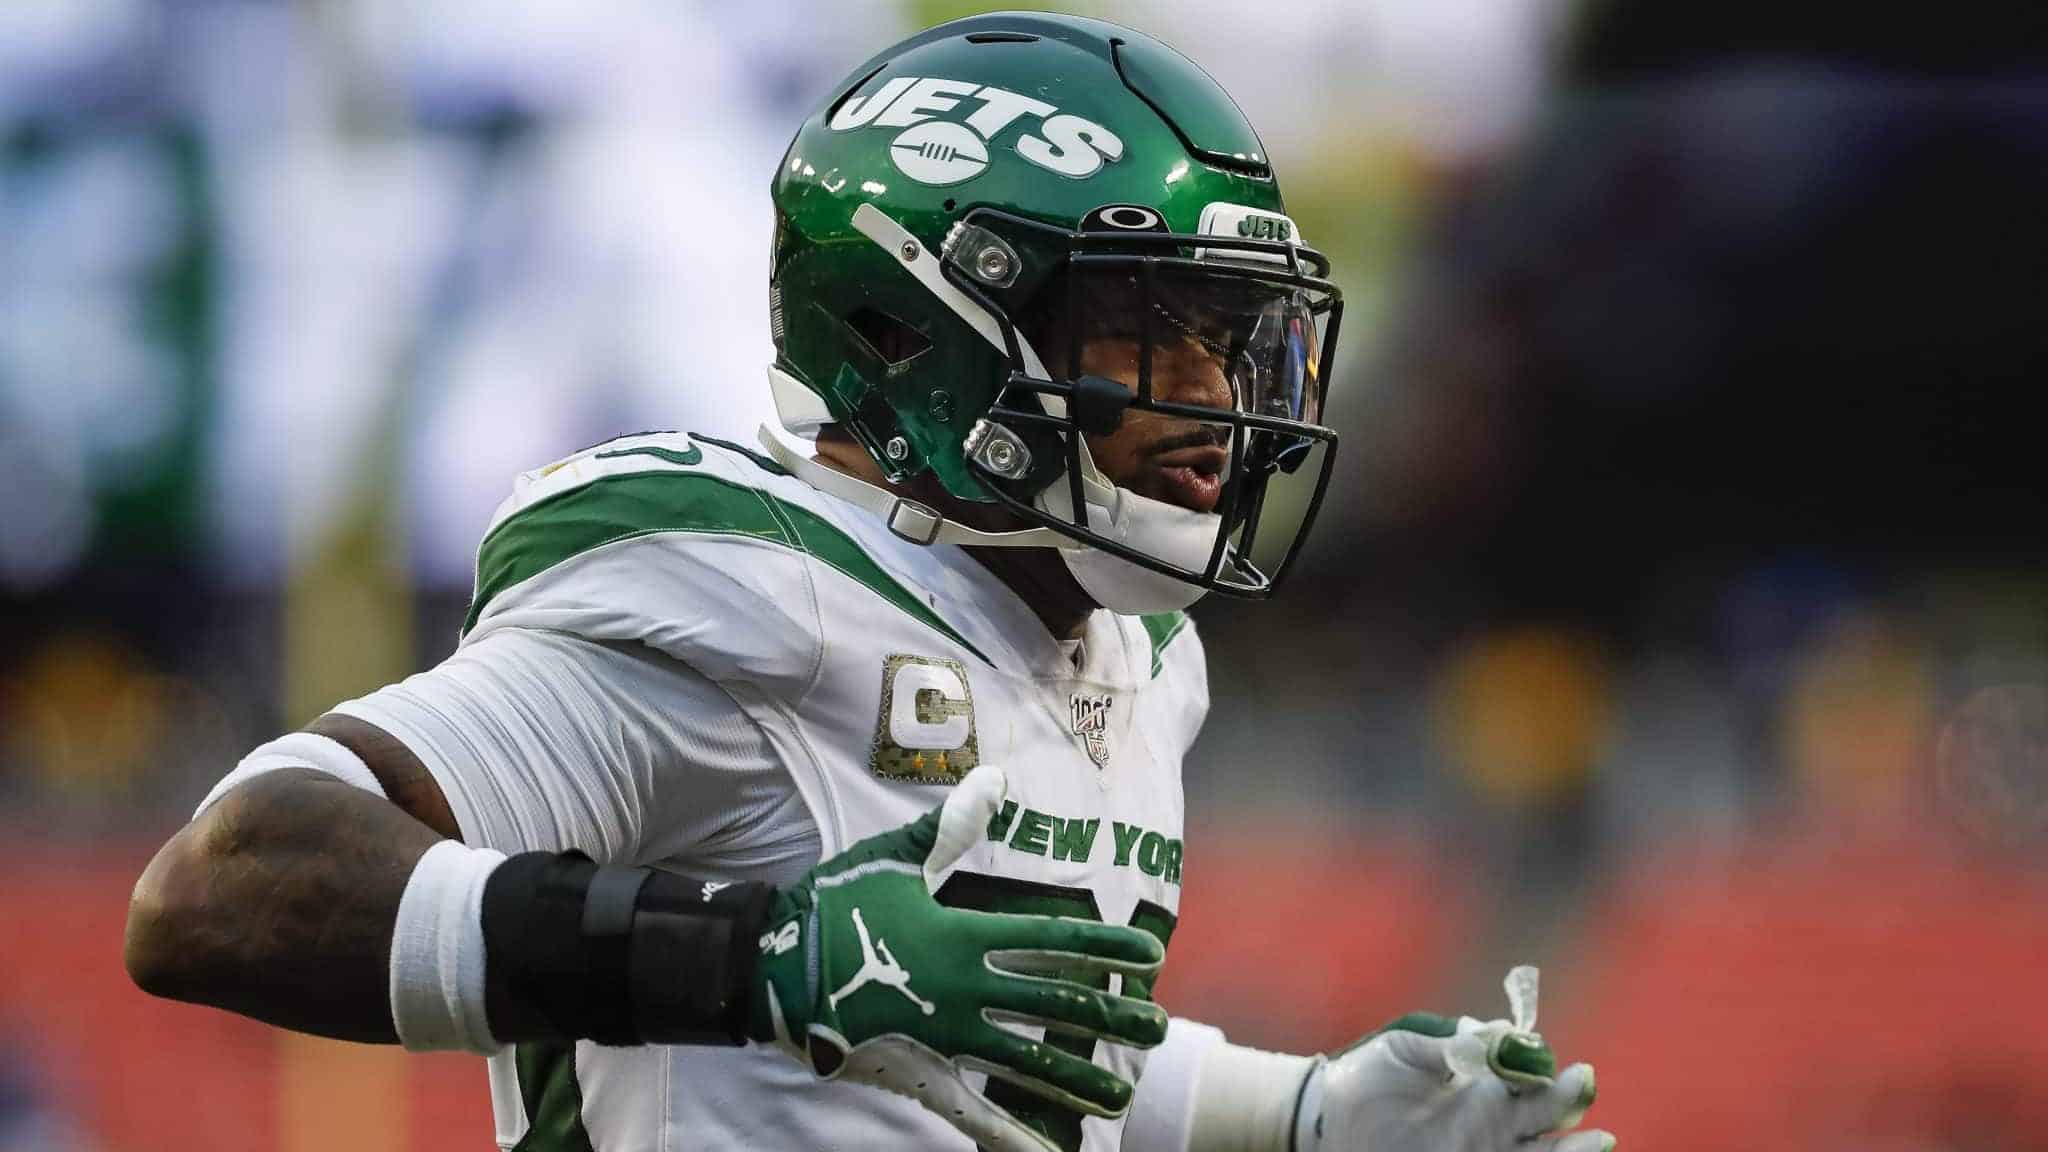 LANDOVER, MD - NOVEMBER 17: Jamal Adams #33 of the New York Jets reacts to a play during the second half of the game against the Washington Redskins at FedExField on November 17, 2019 in Landover, Maryland.